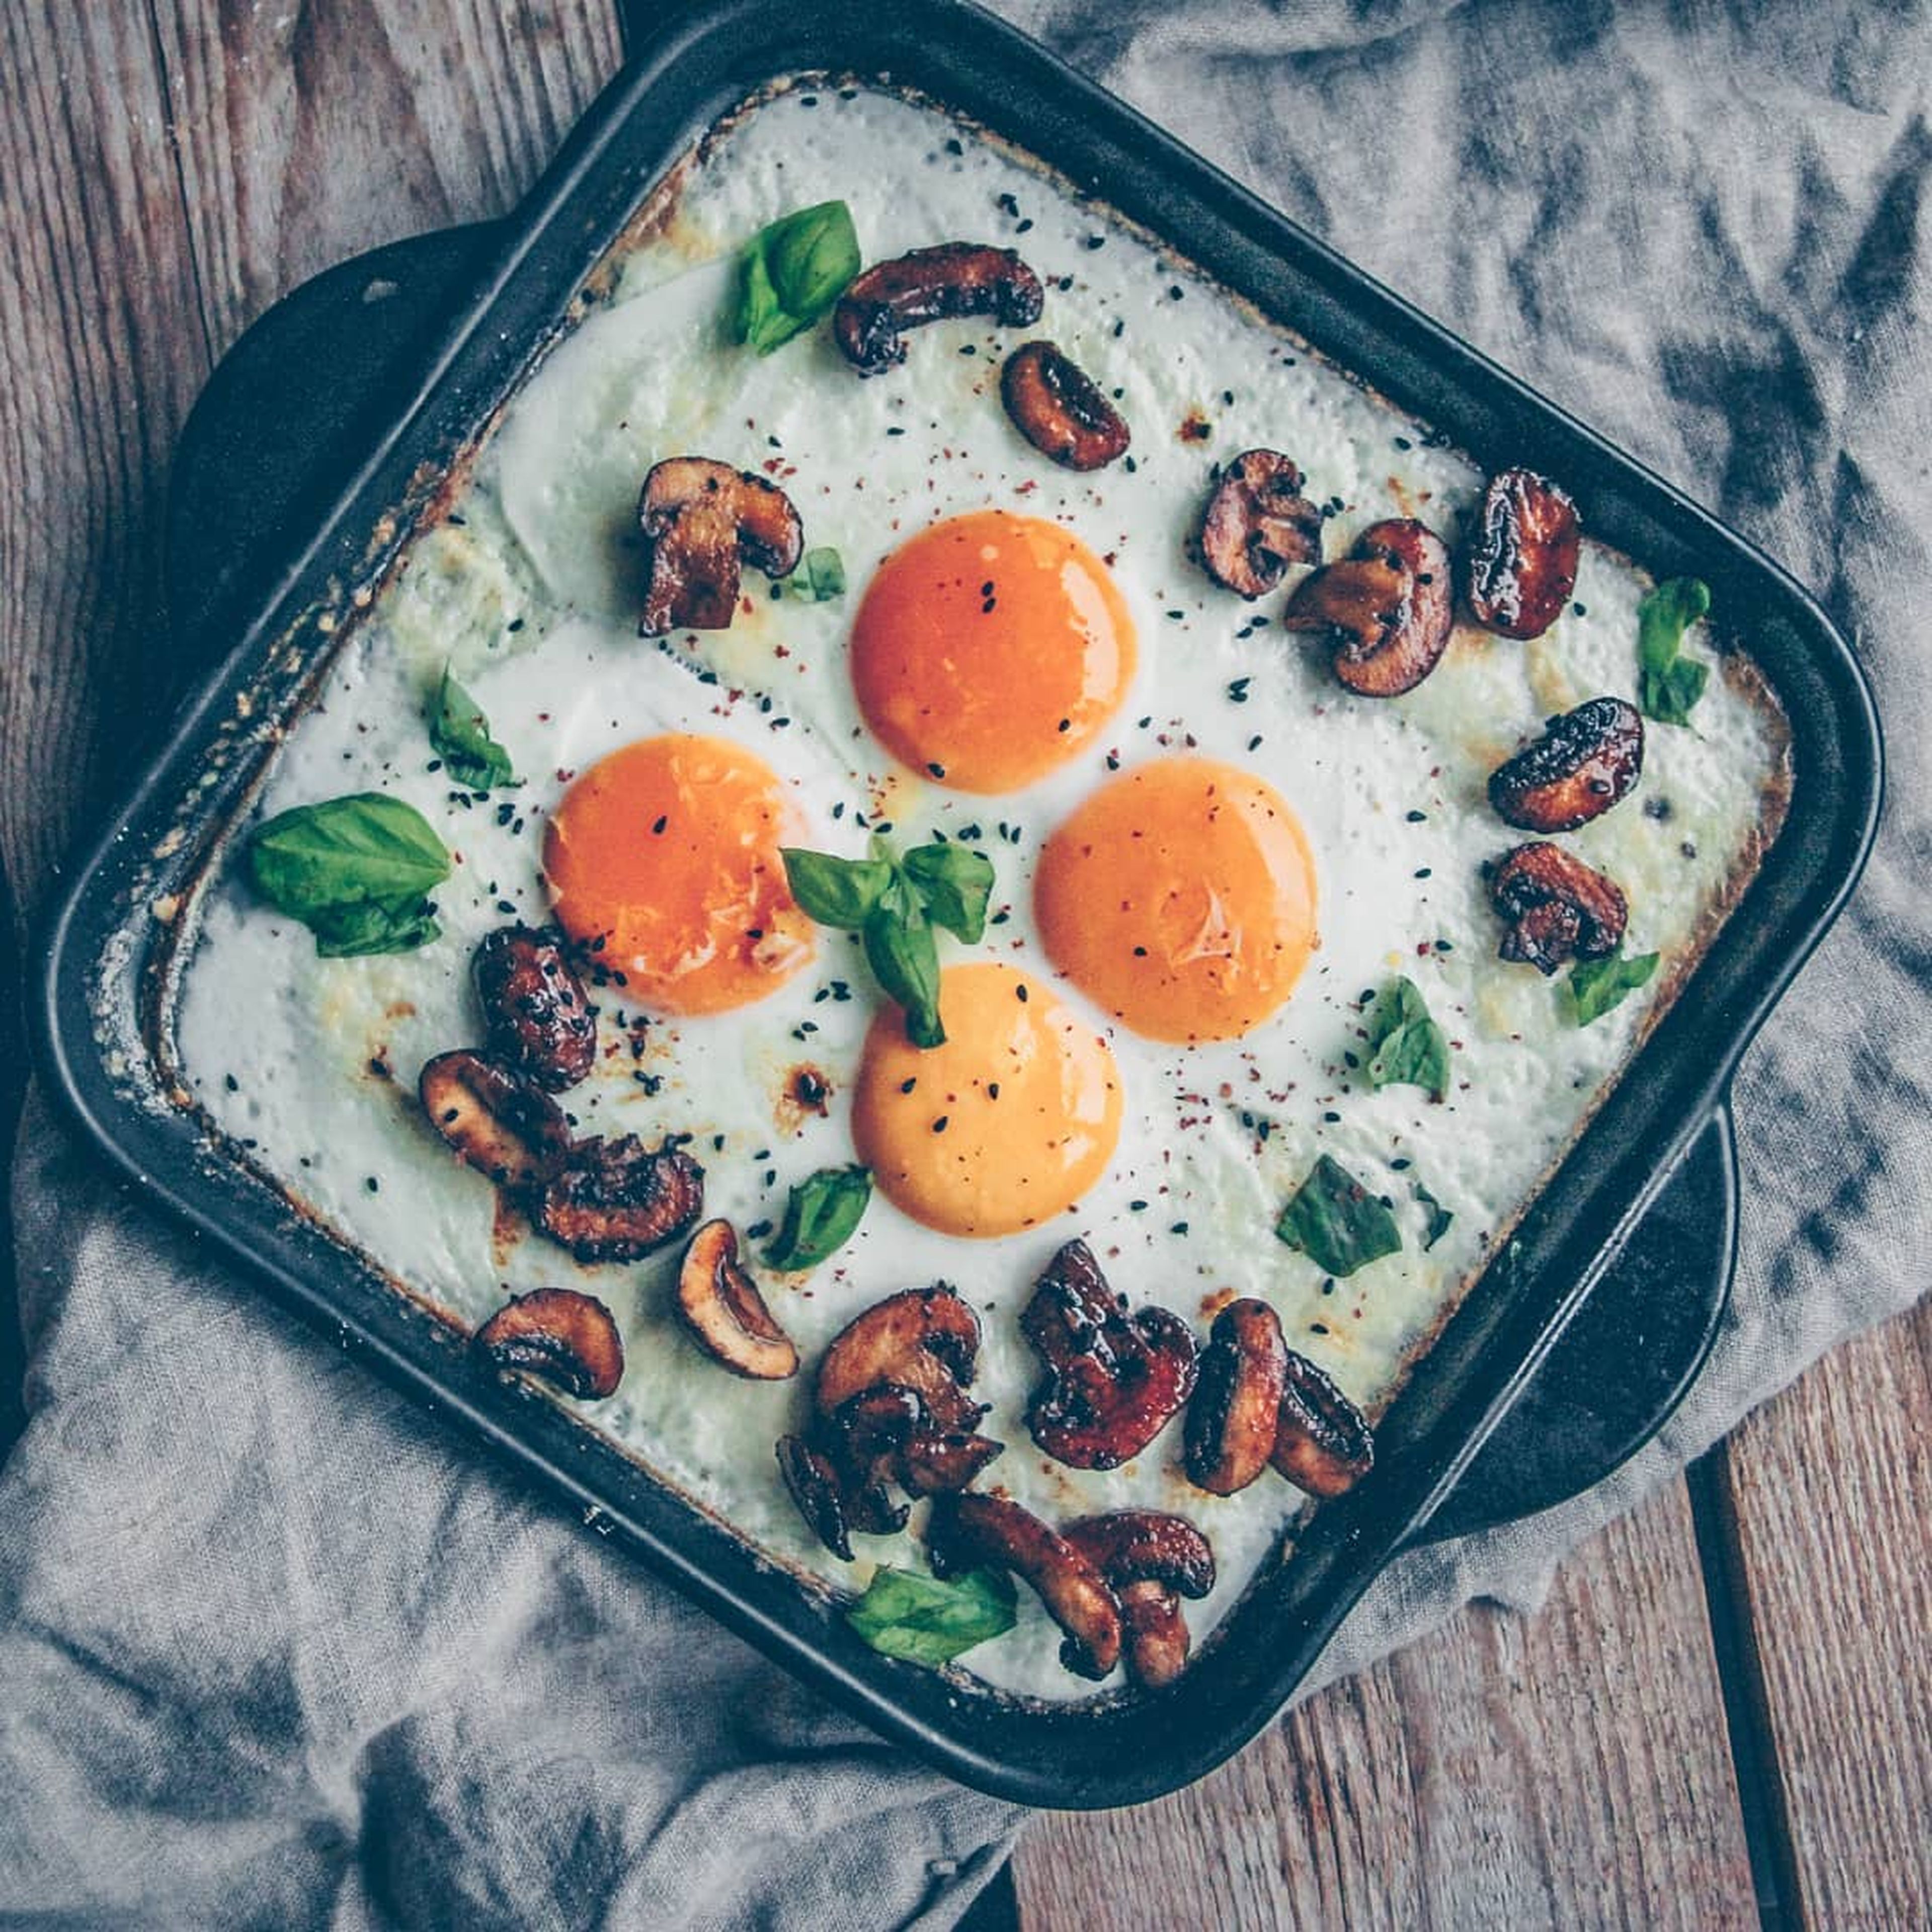 Baked eggs with caramelized mushrooms